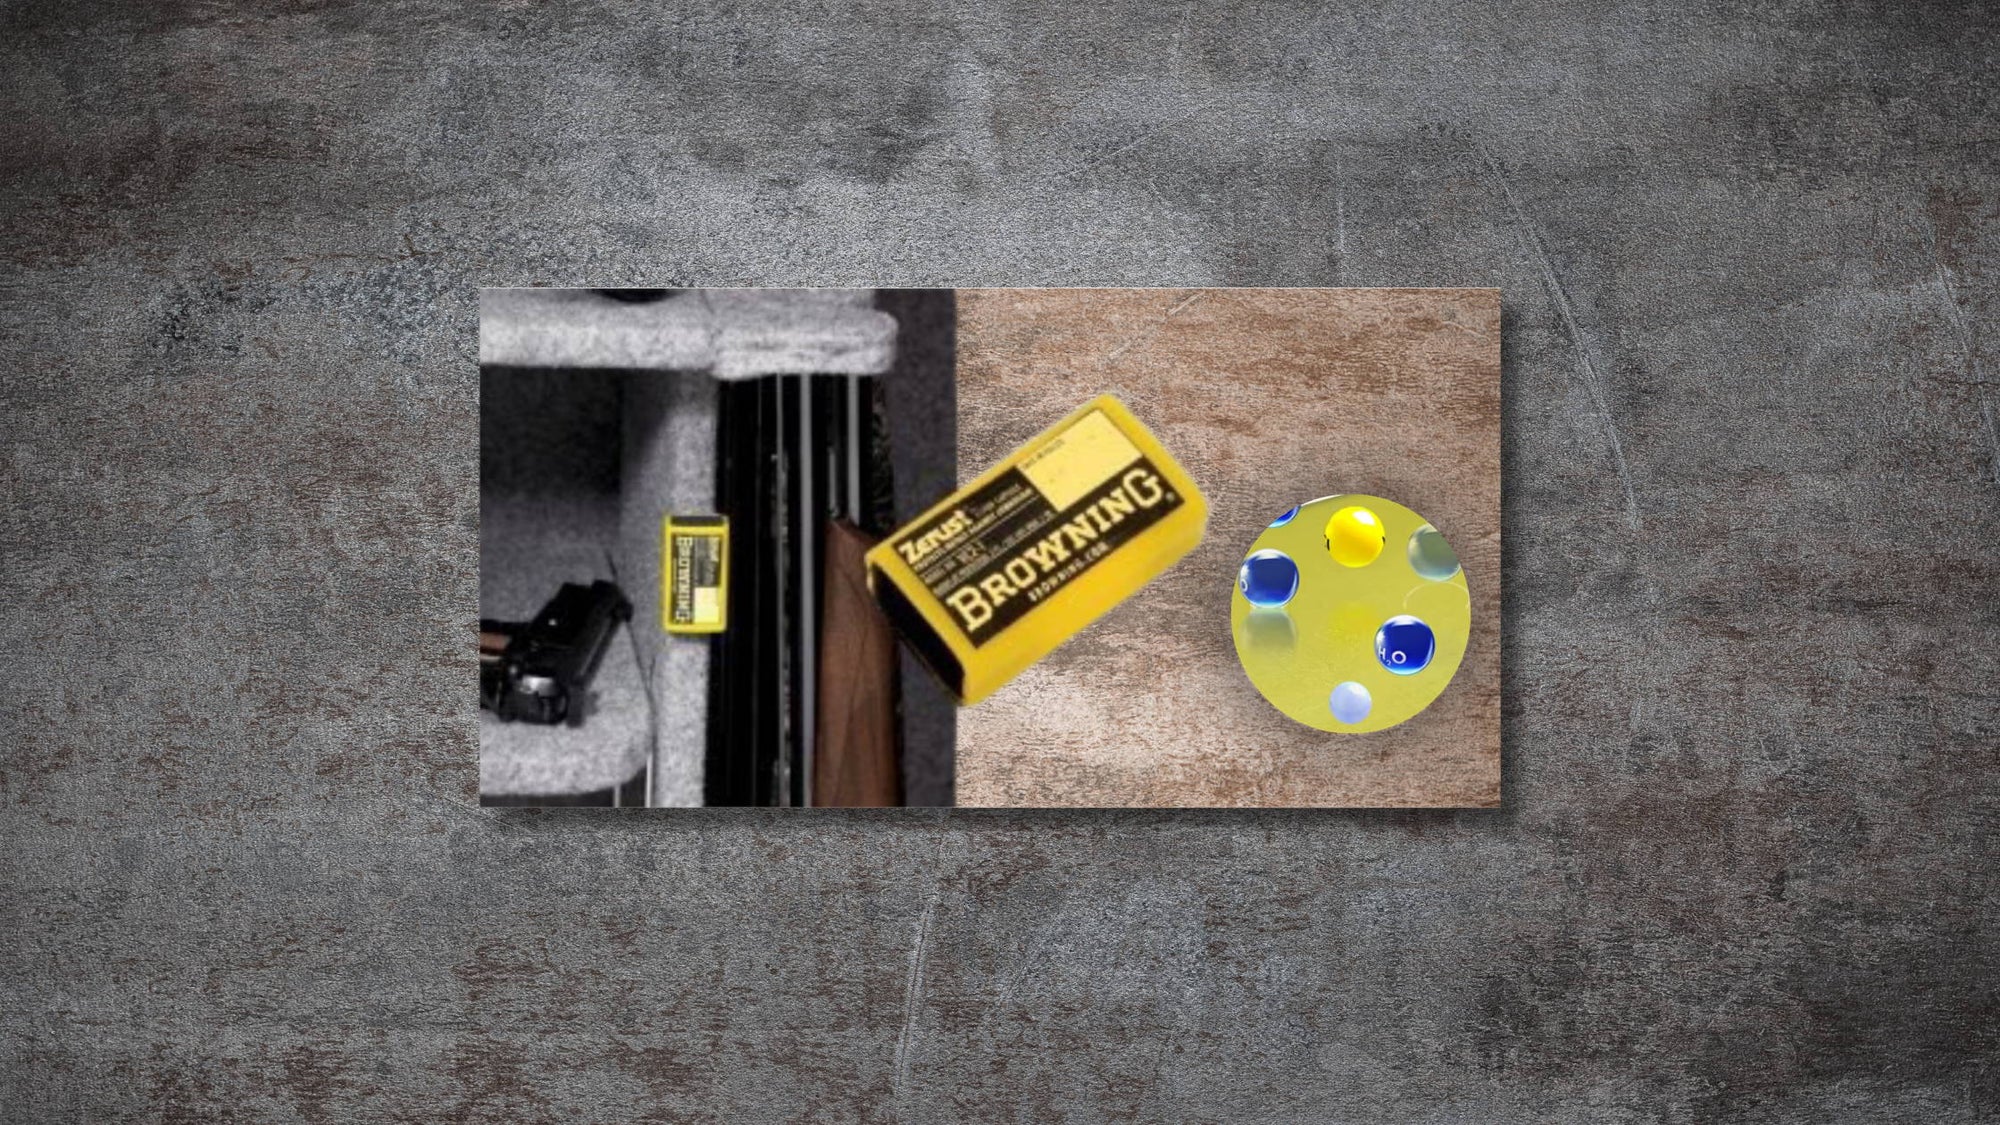 Vapor Corrosion Inhibitor (VCI) Technology Options for Browning Safes